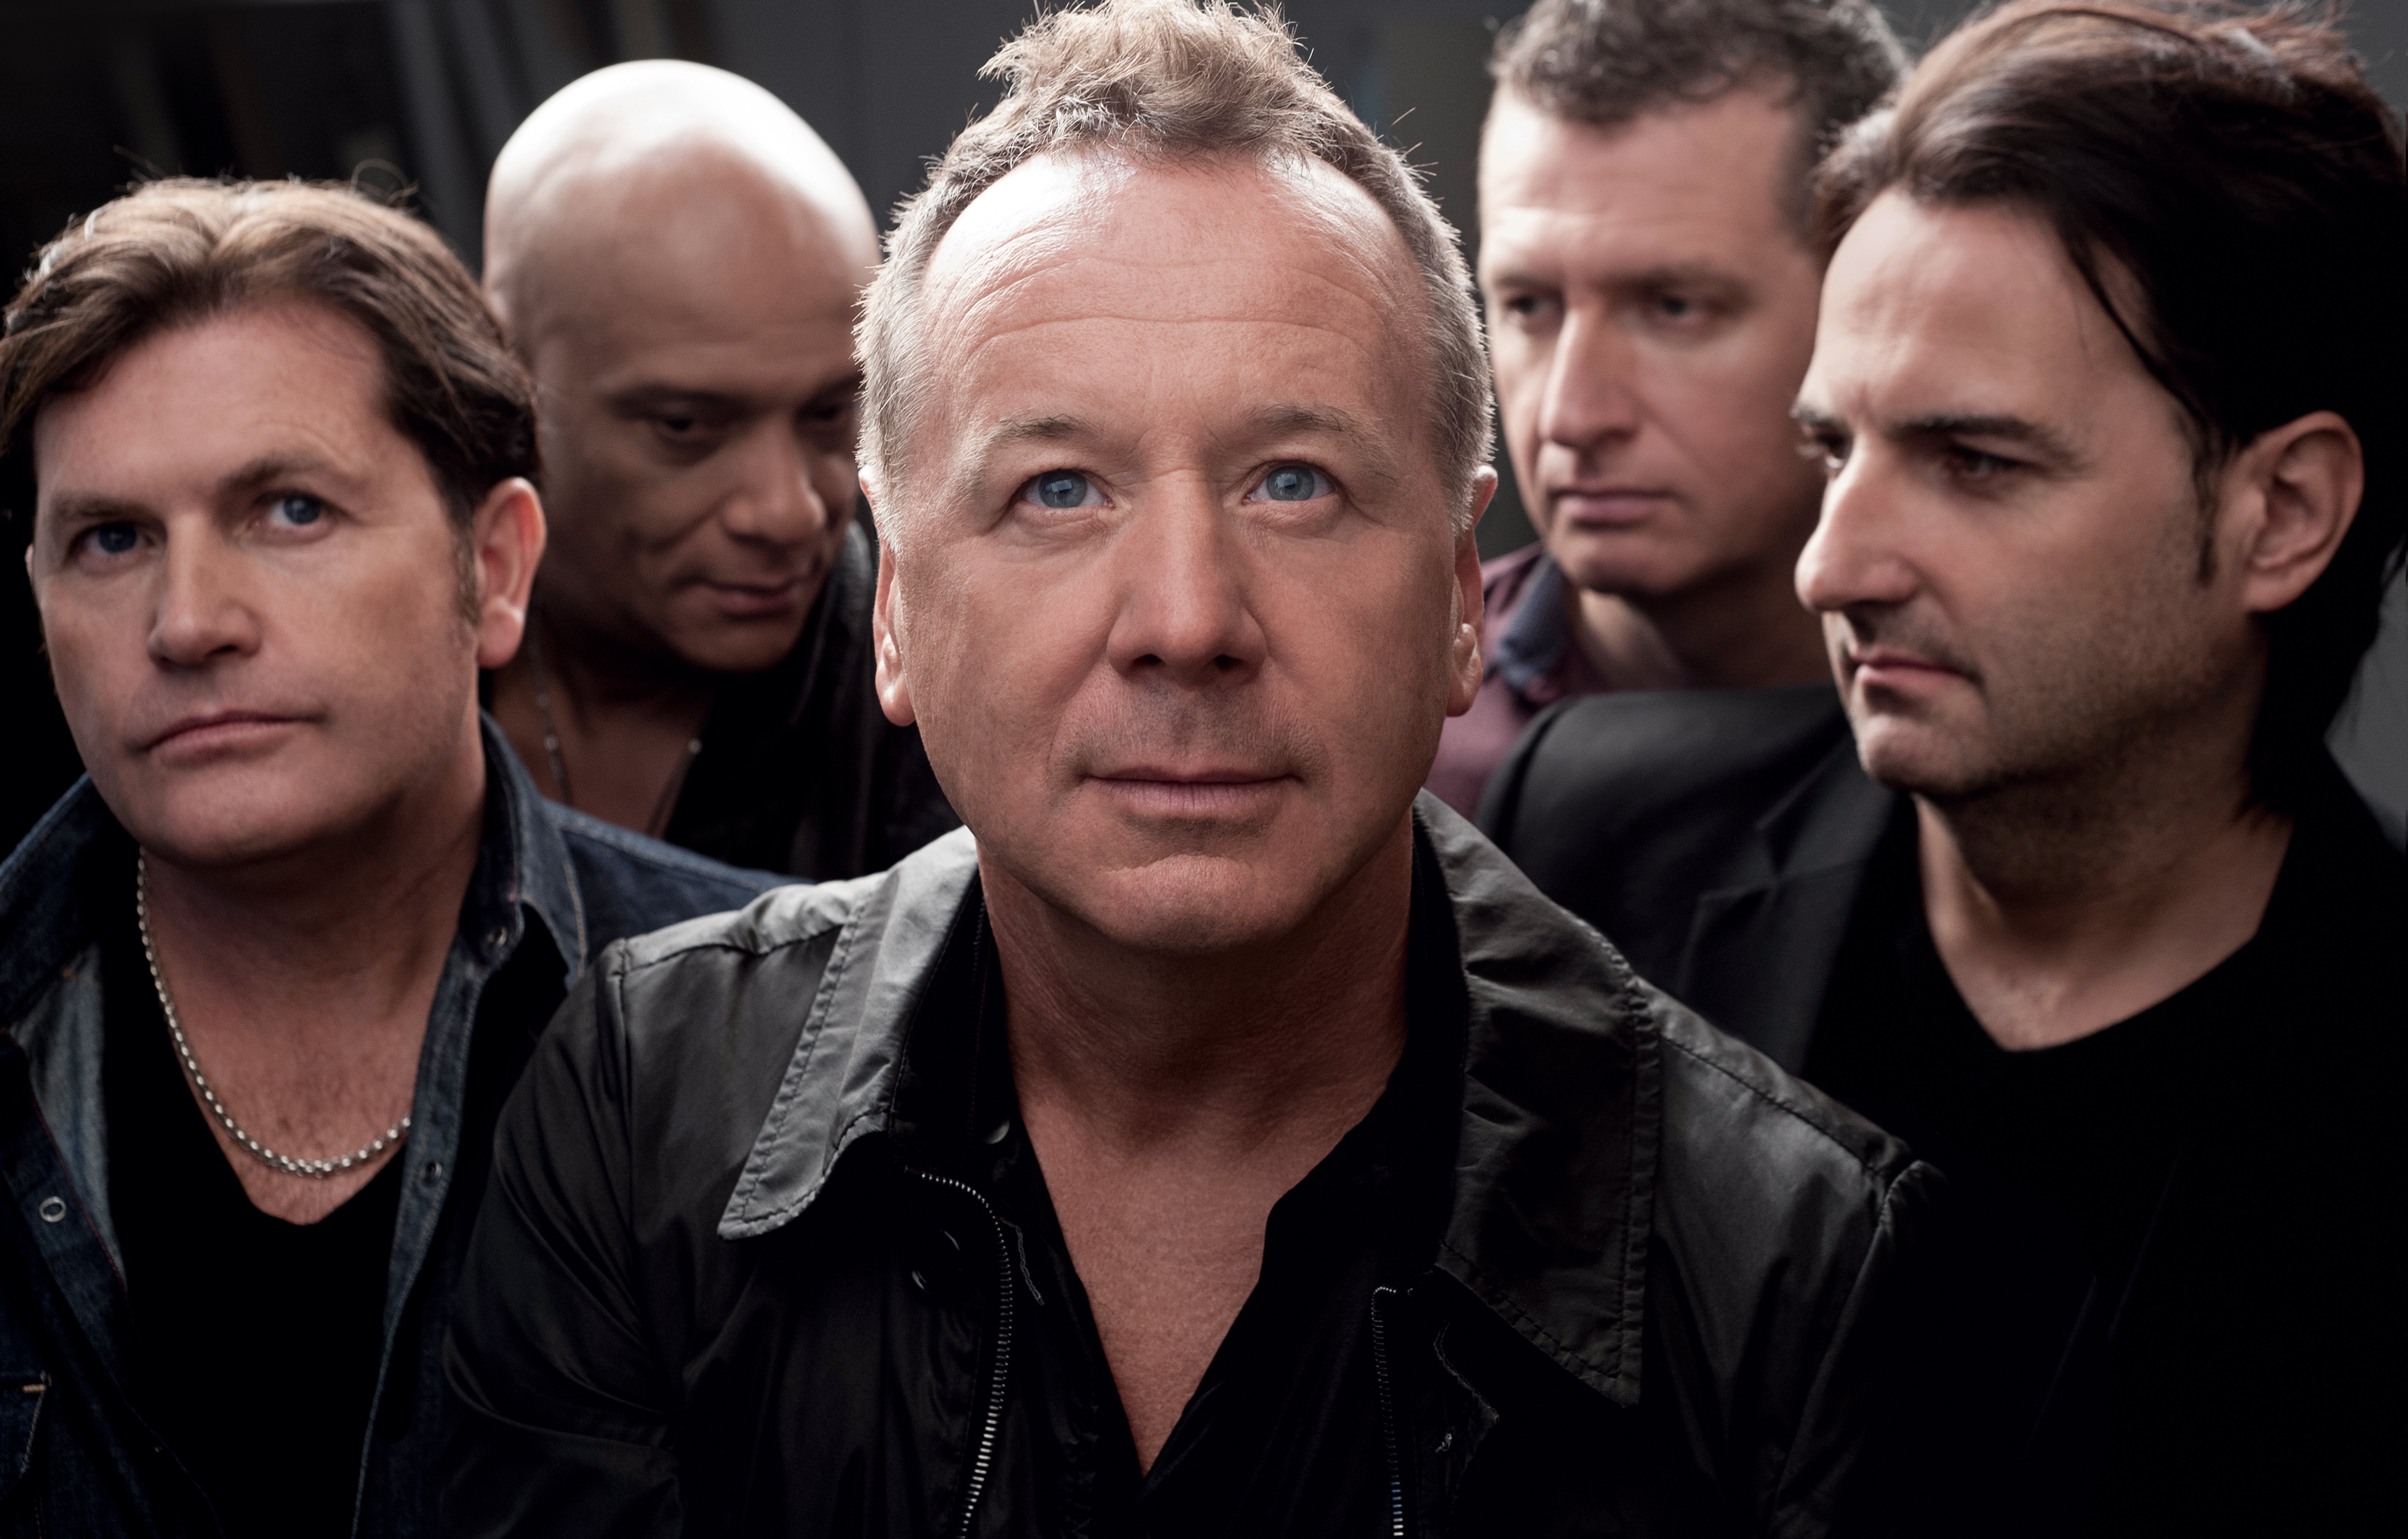 simple minds tour ticketmaster